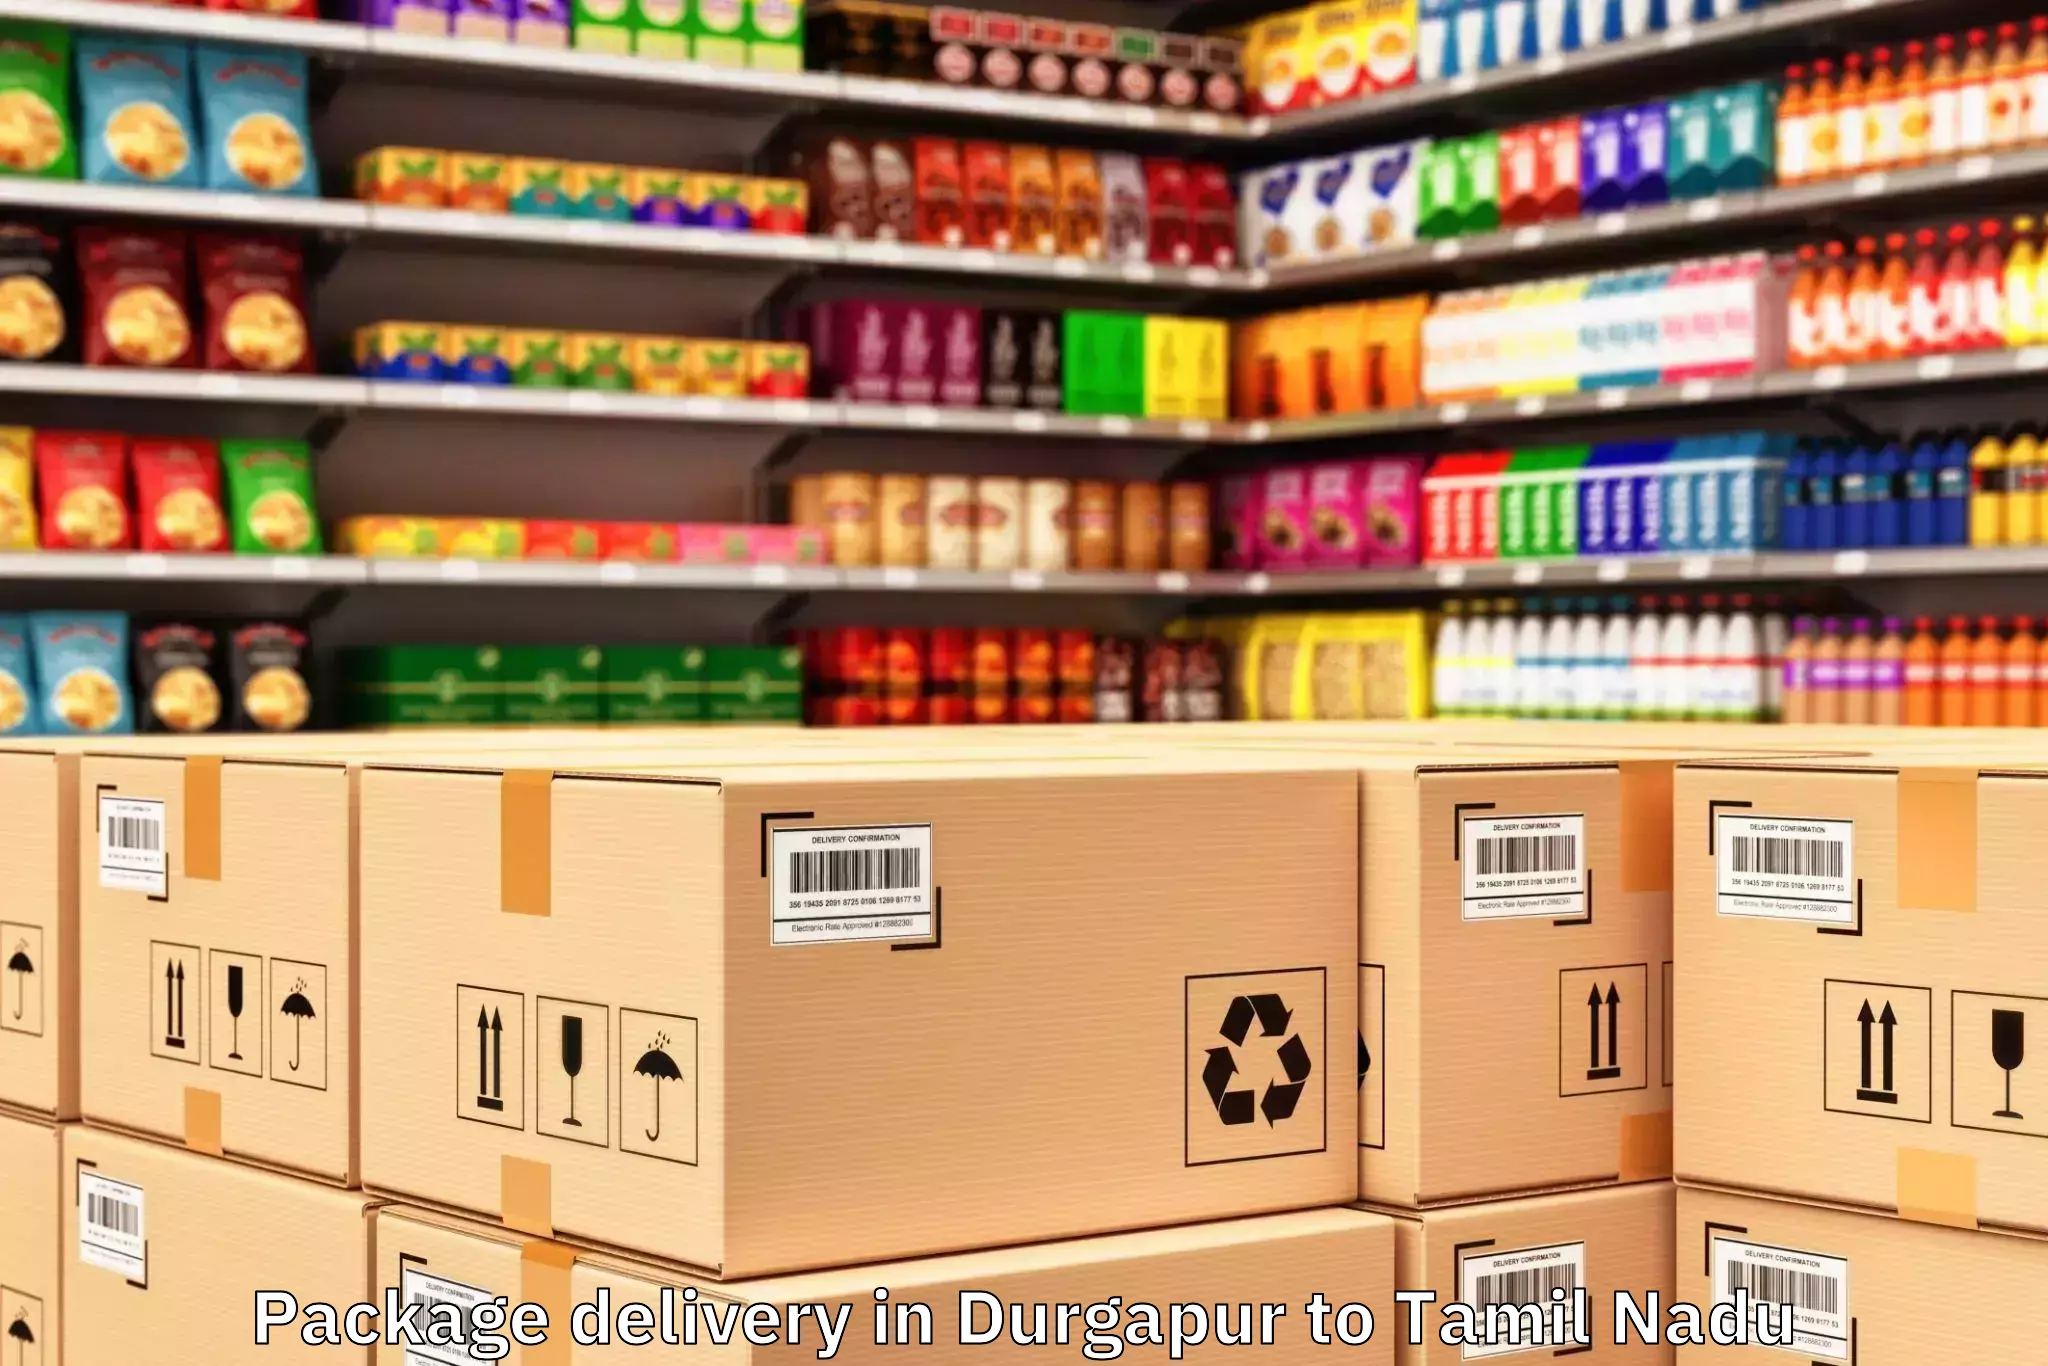 Quality Durgapur to Mayiladuthurai Package Delivery